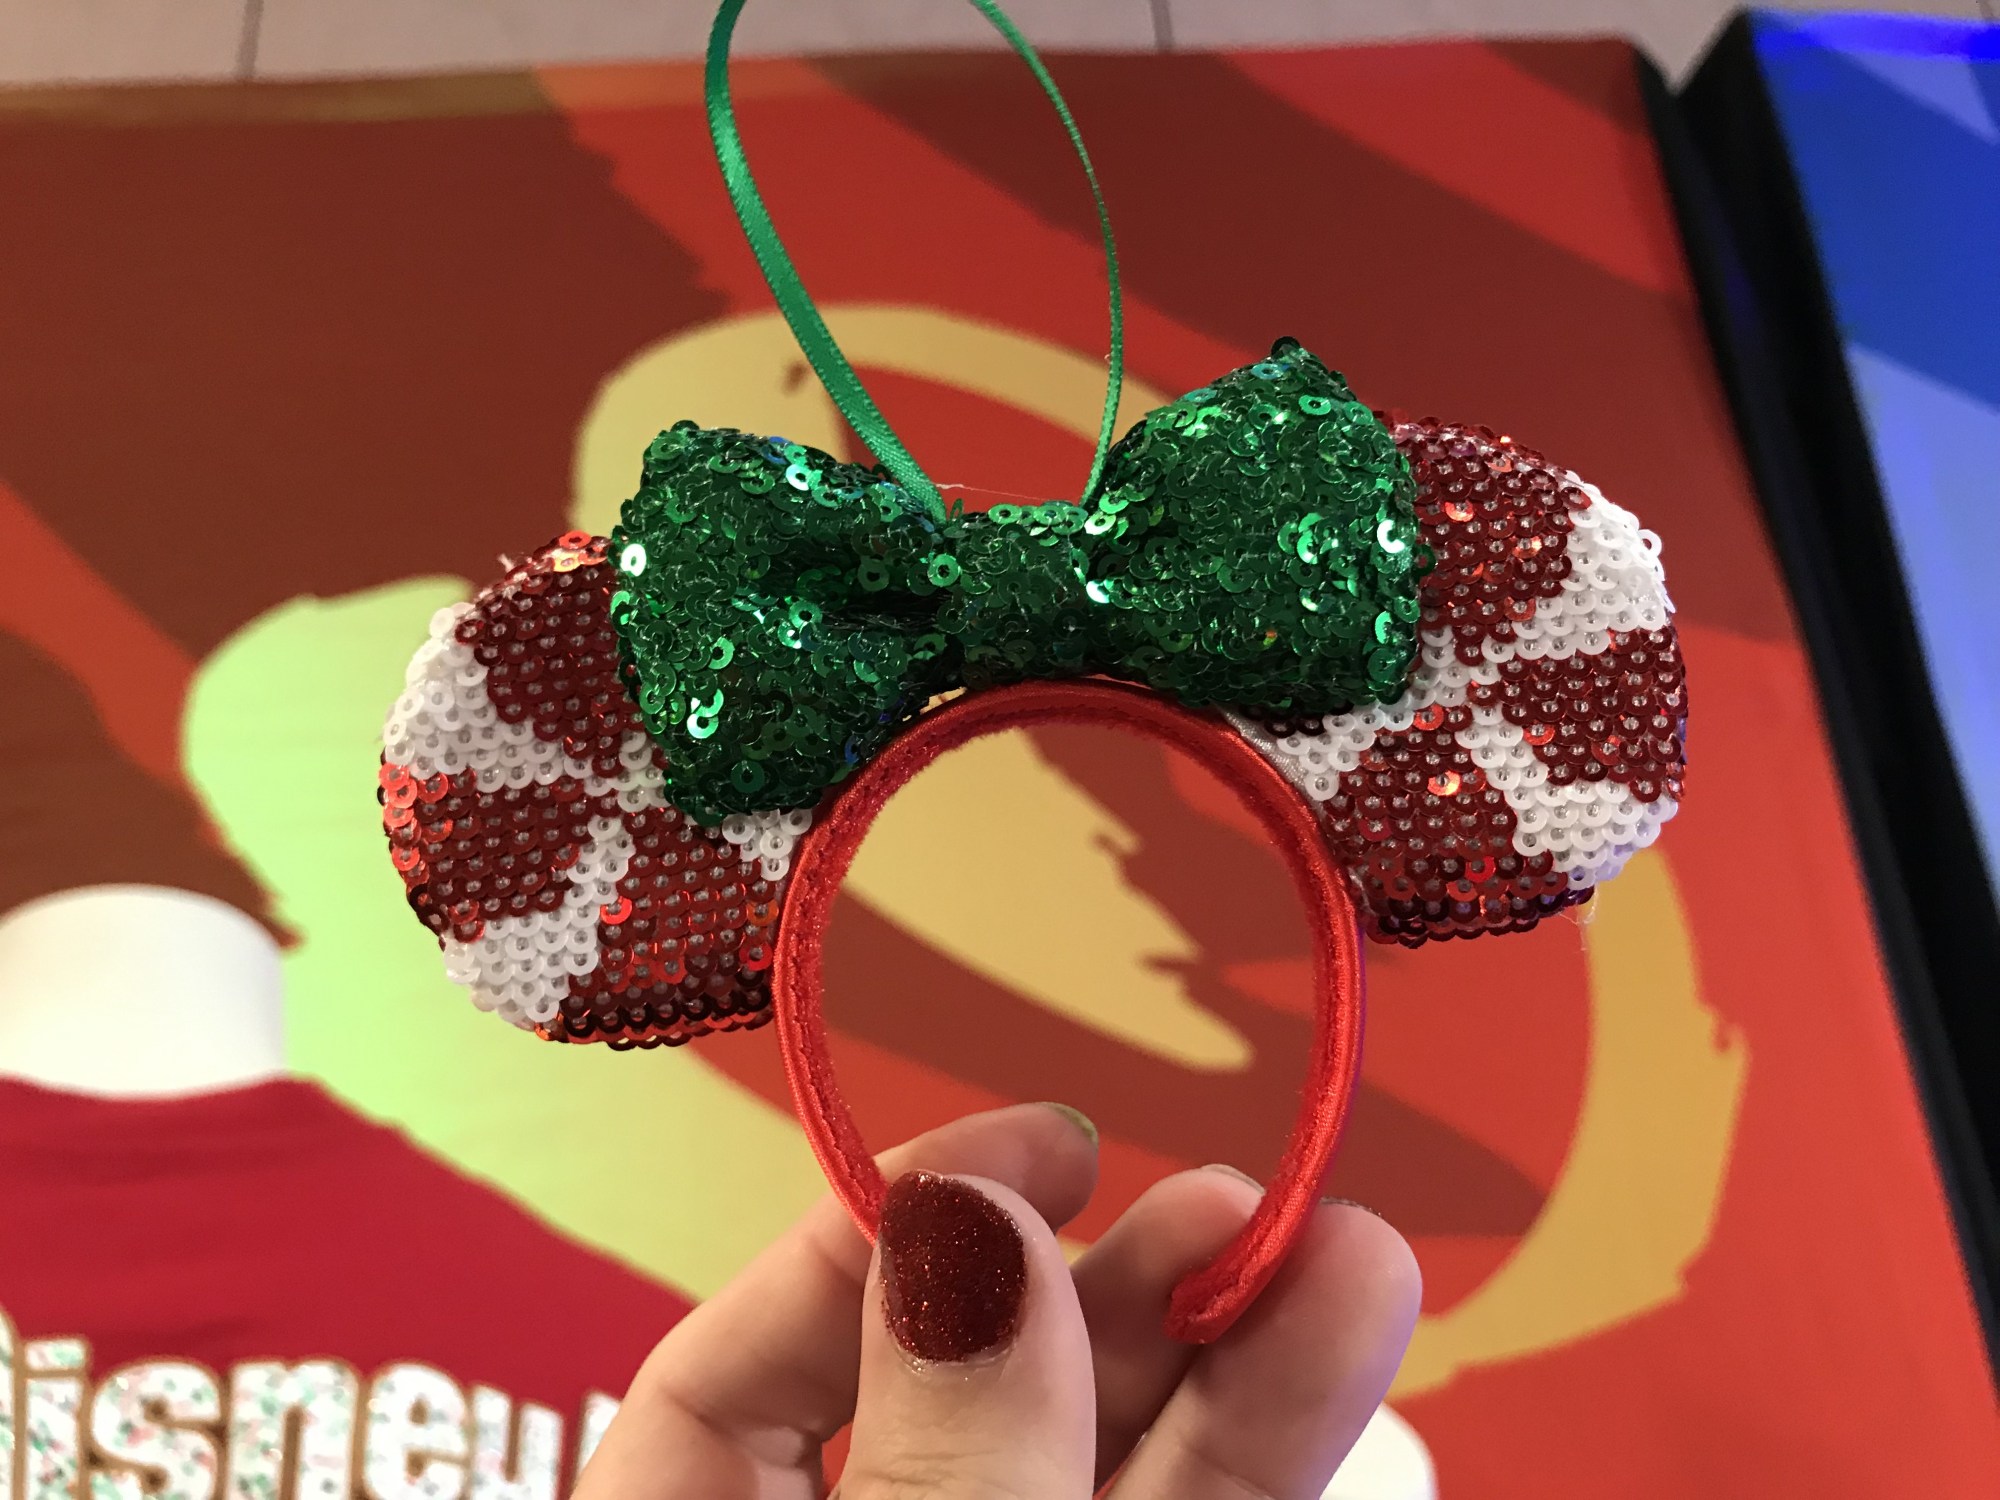 Disney Parks Holiday Merchandise Has Made A Magical Appearance